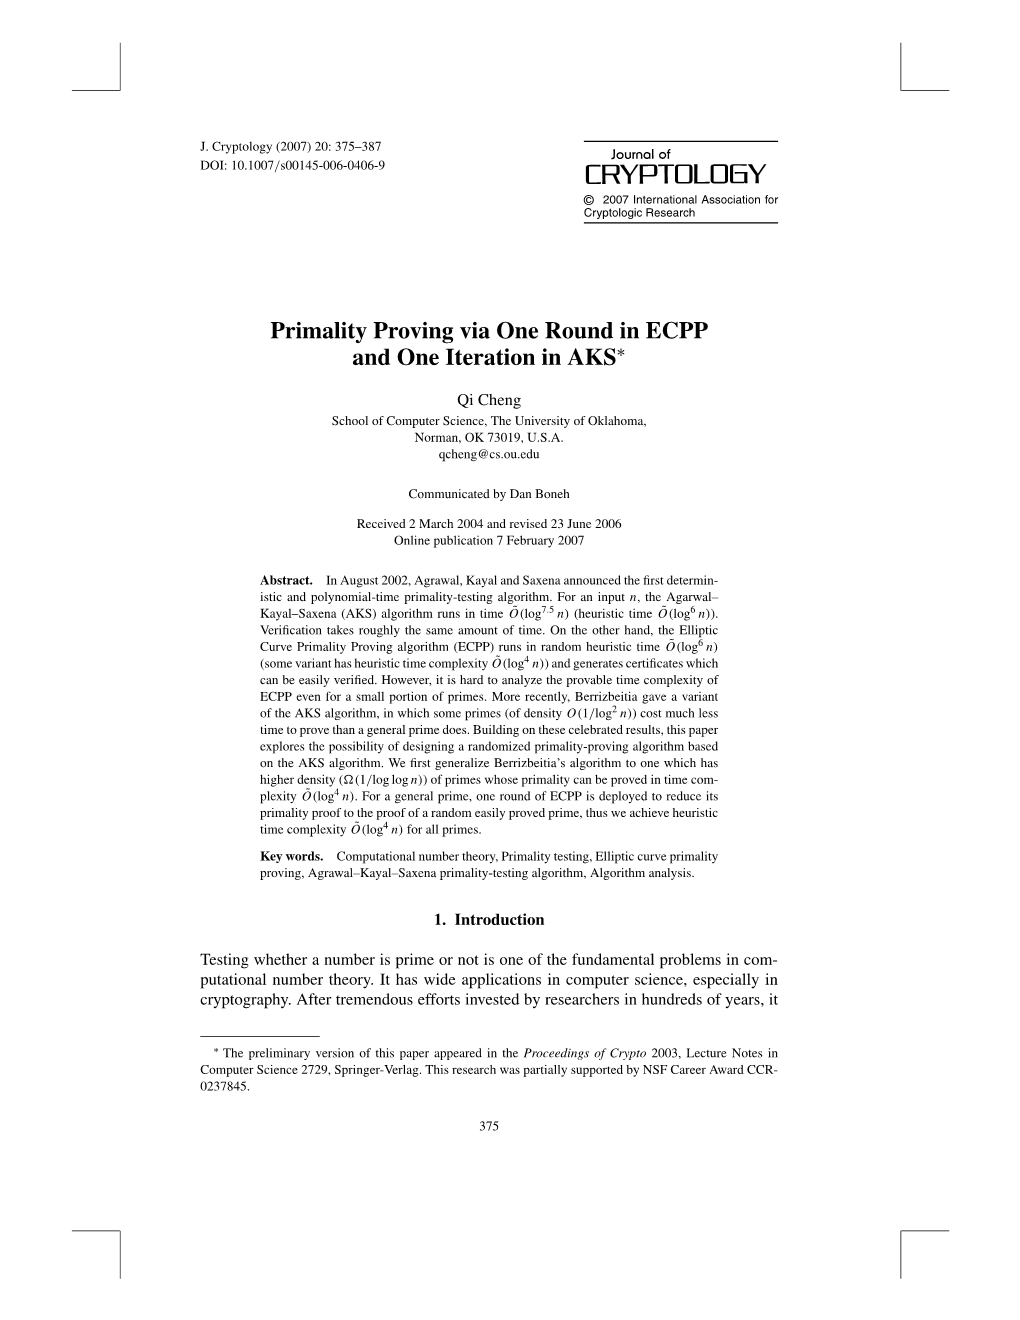 Primality Proving Via One Round in ECPP and One Iteration in AKS∗